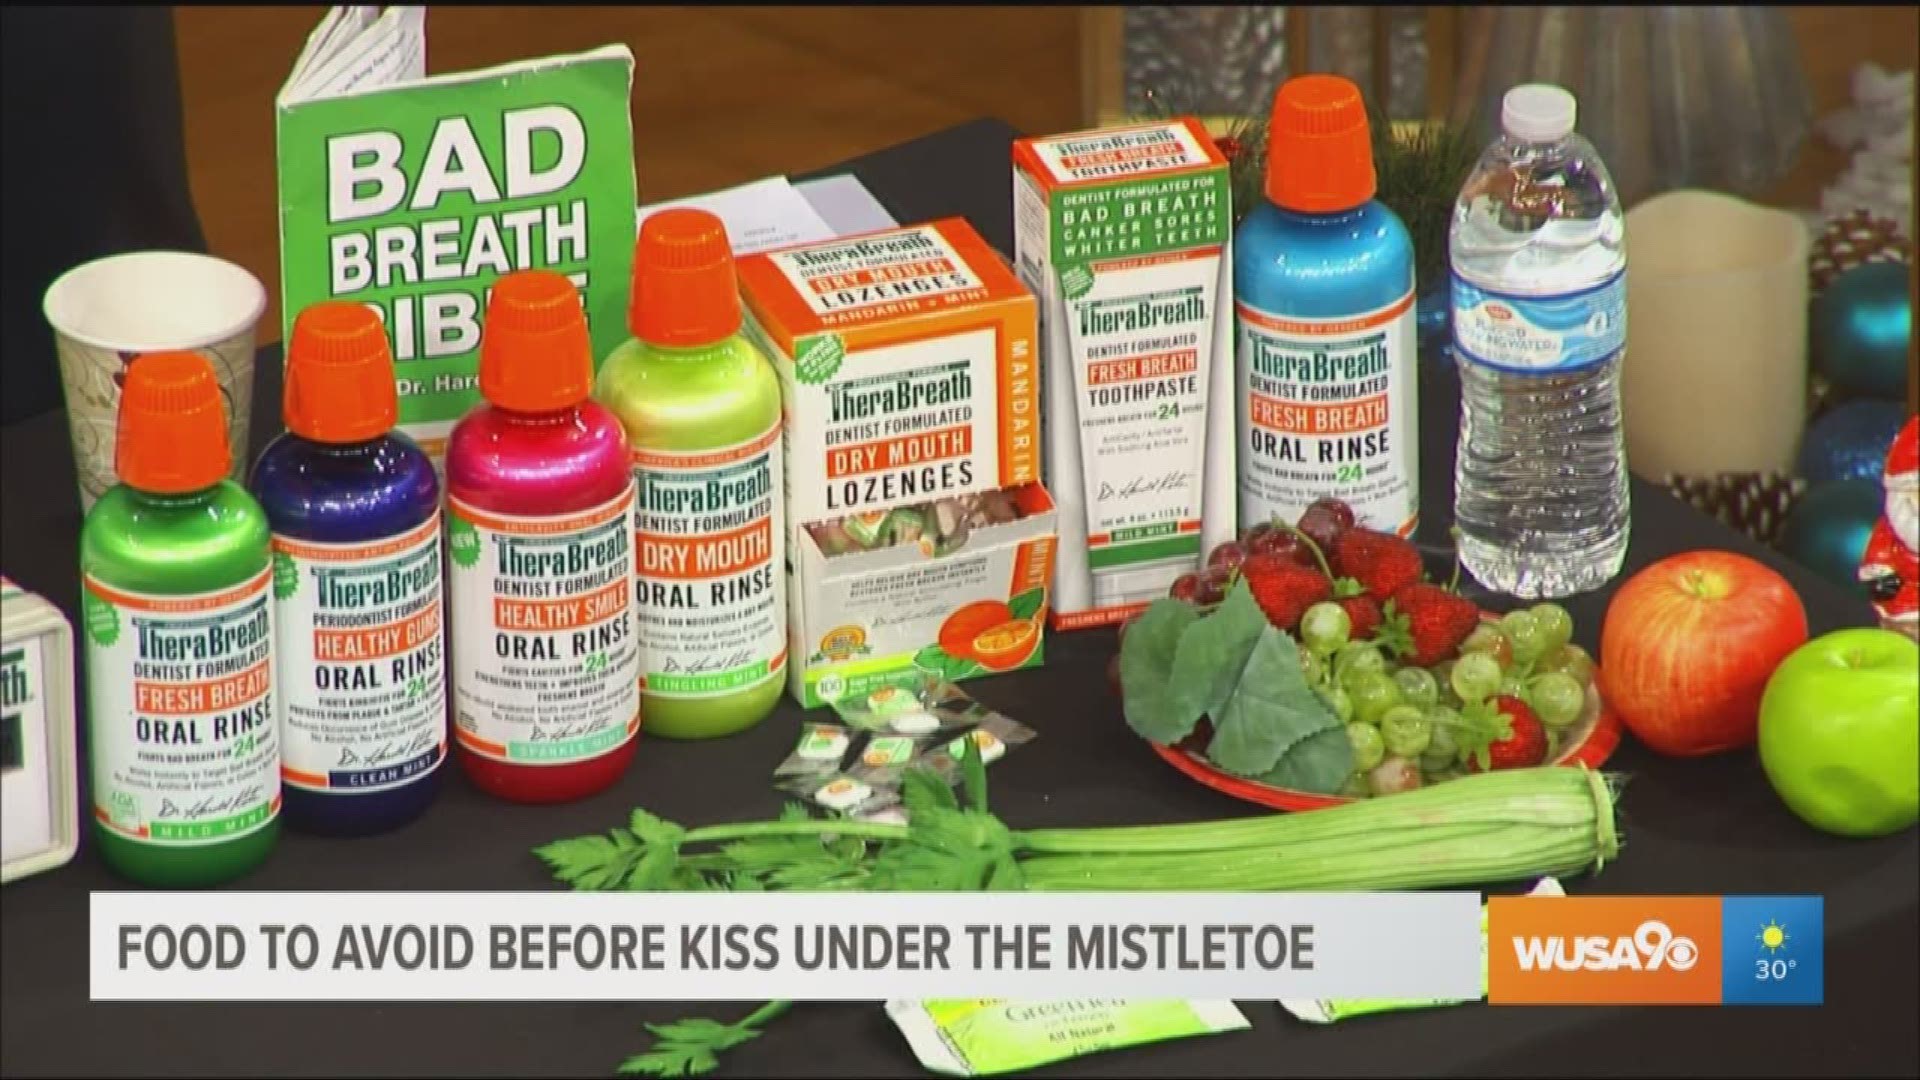 Dr. Harold Katz, founder of TheraBreath explains tips and tricks on how to get rid of pesky bad breath.